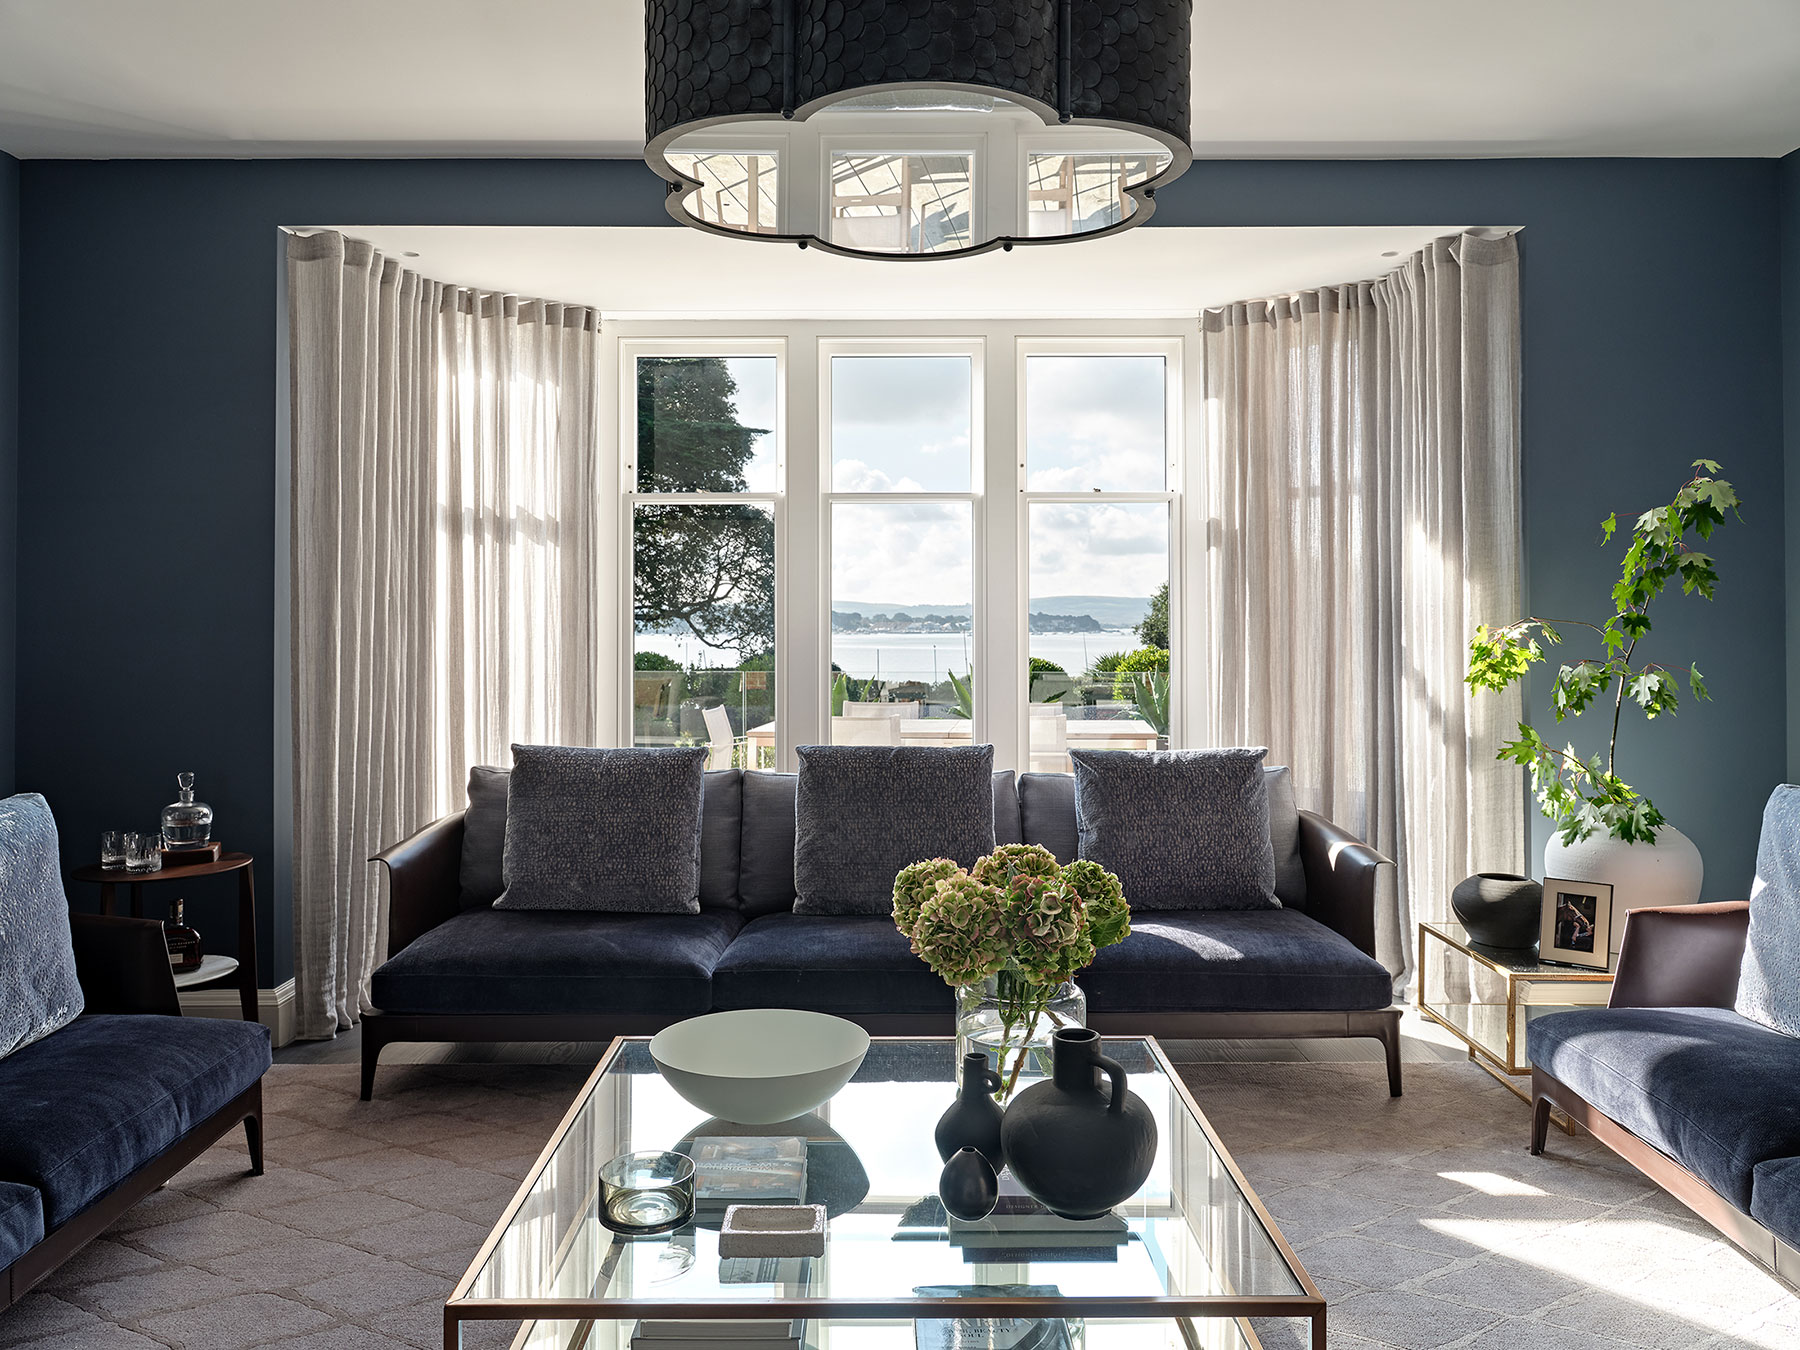 Drawing Room with view out over water of LEIVARS Sandbanks project, 1930s Family Home